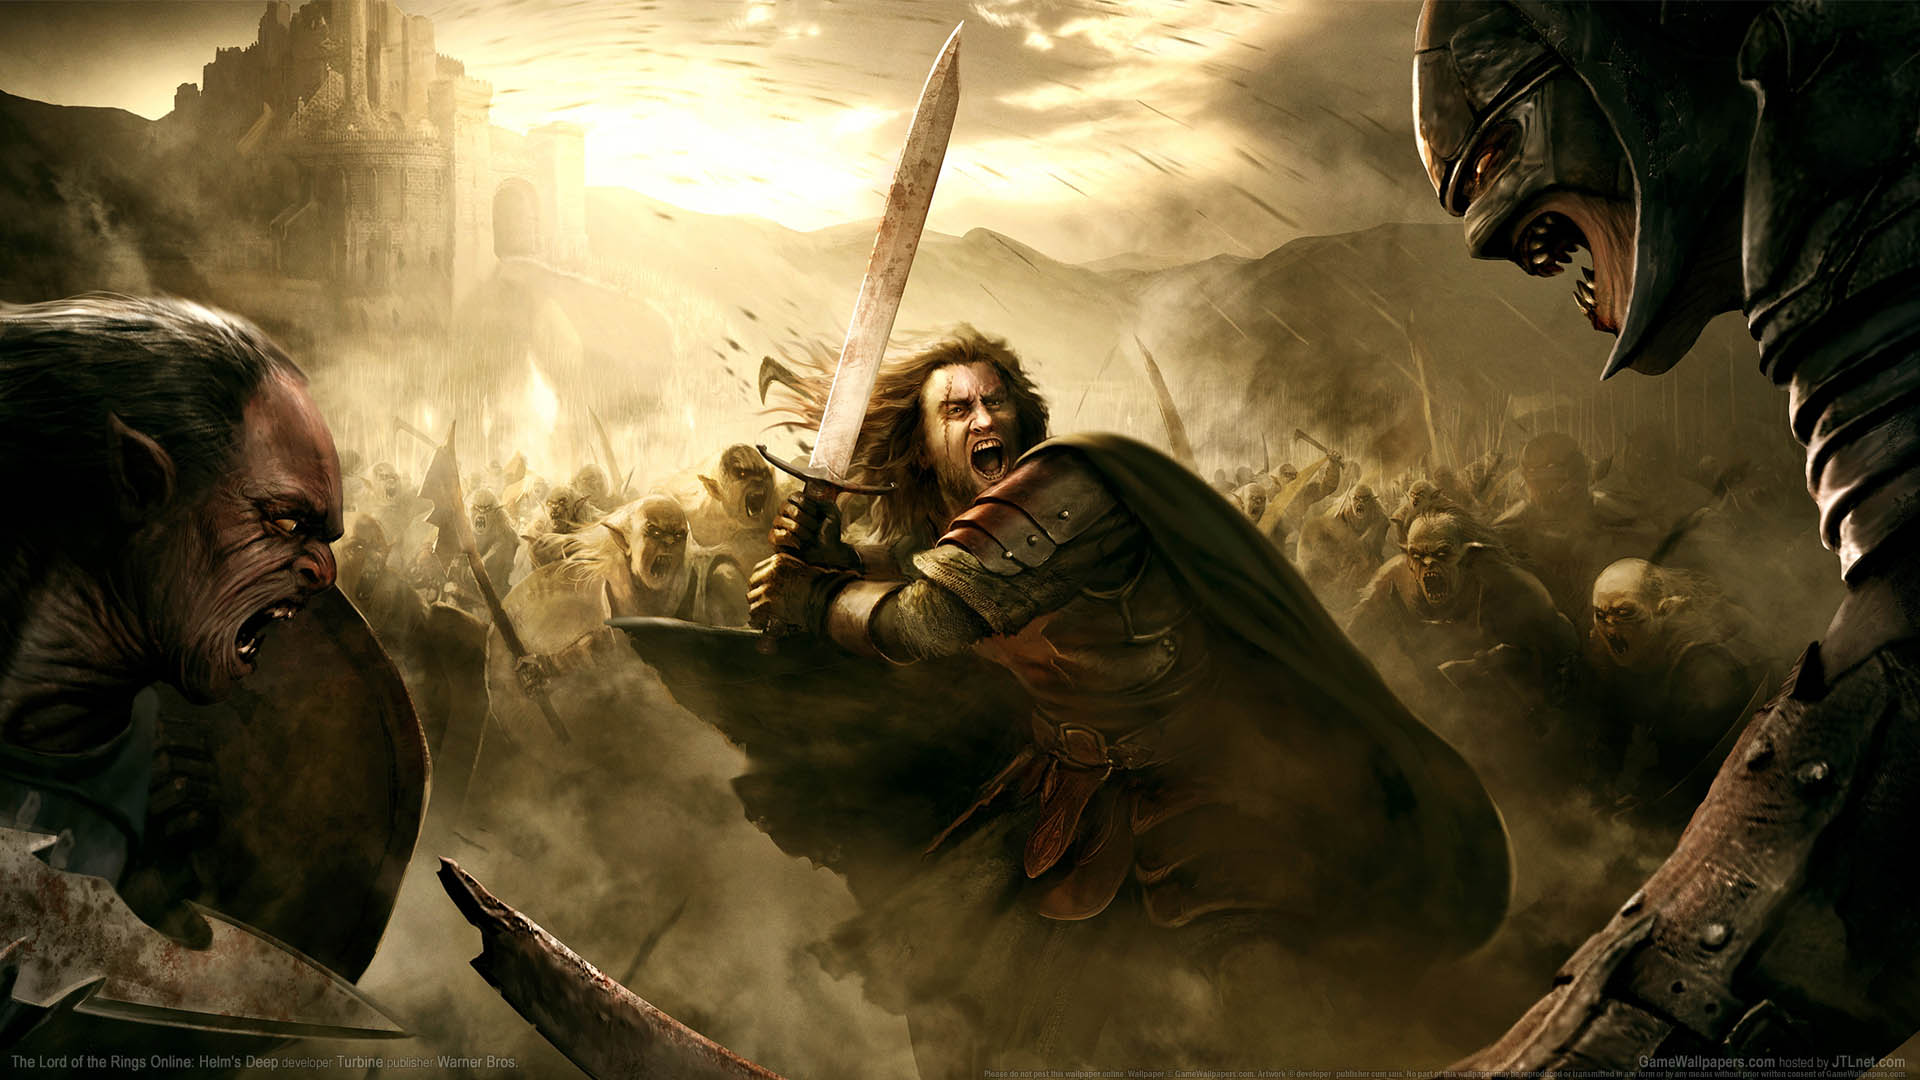 The Lord of the Rings Online: Helm's Deep wallpaper 01 1920x1080